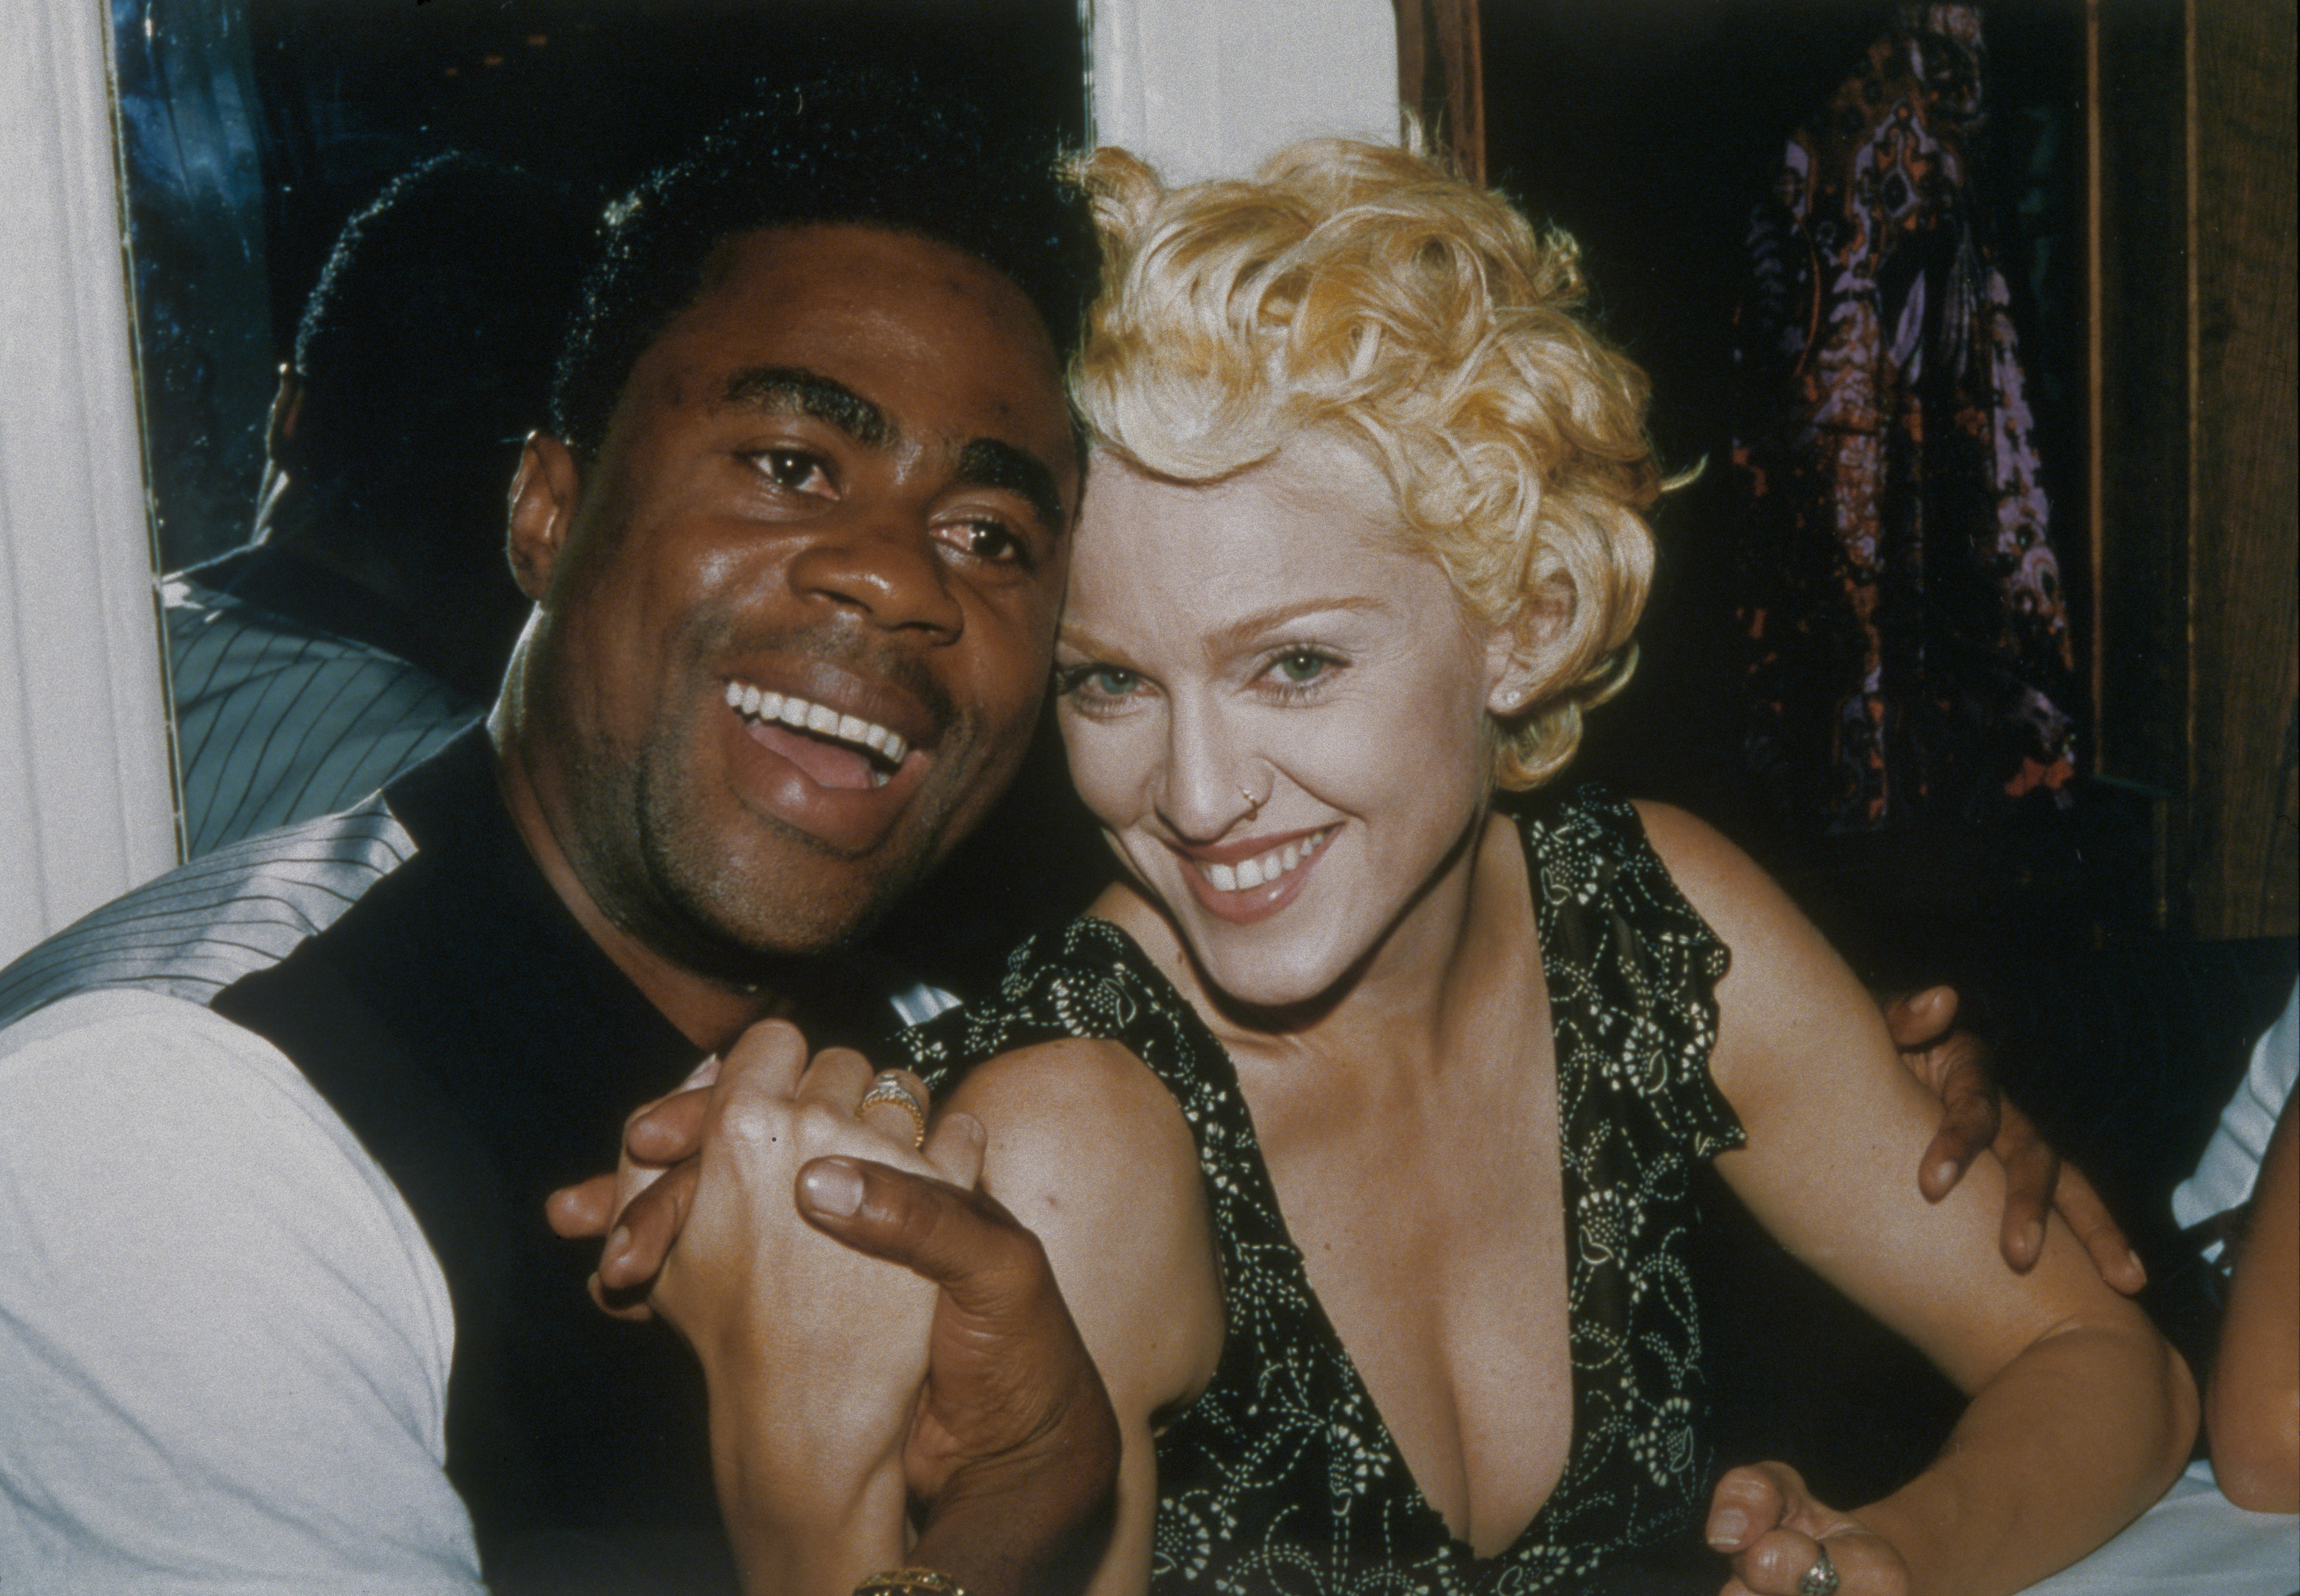 Madonna sitting and smiling while holding hands with a smiling man